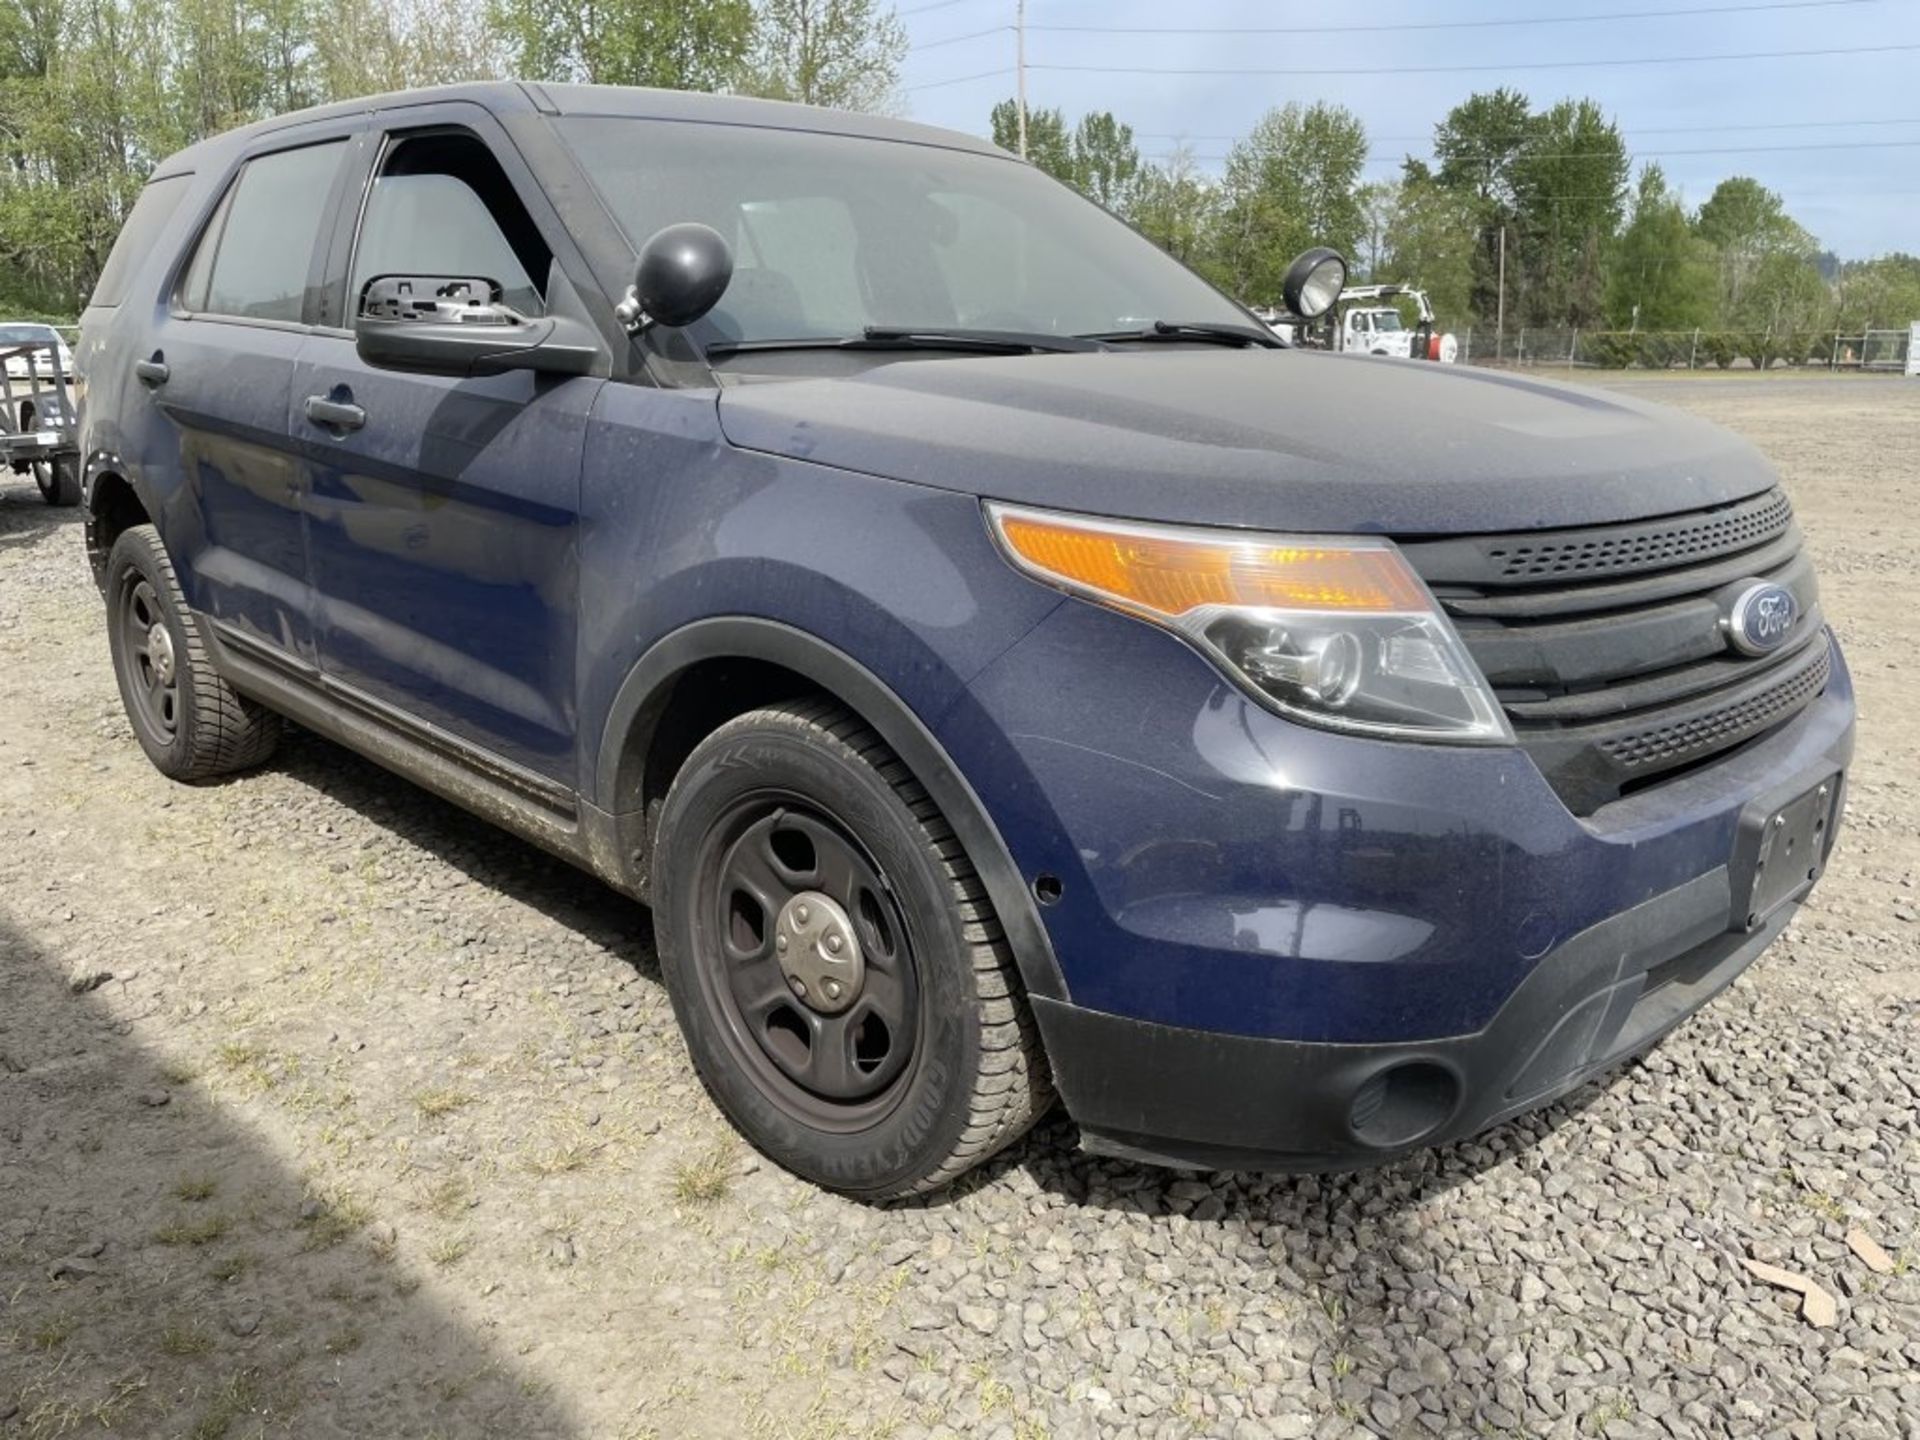 2015 Ford Explorer SUV - Image 2 of 18